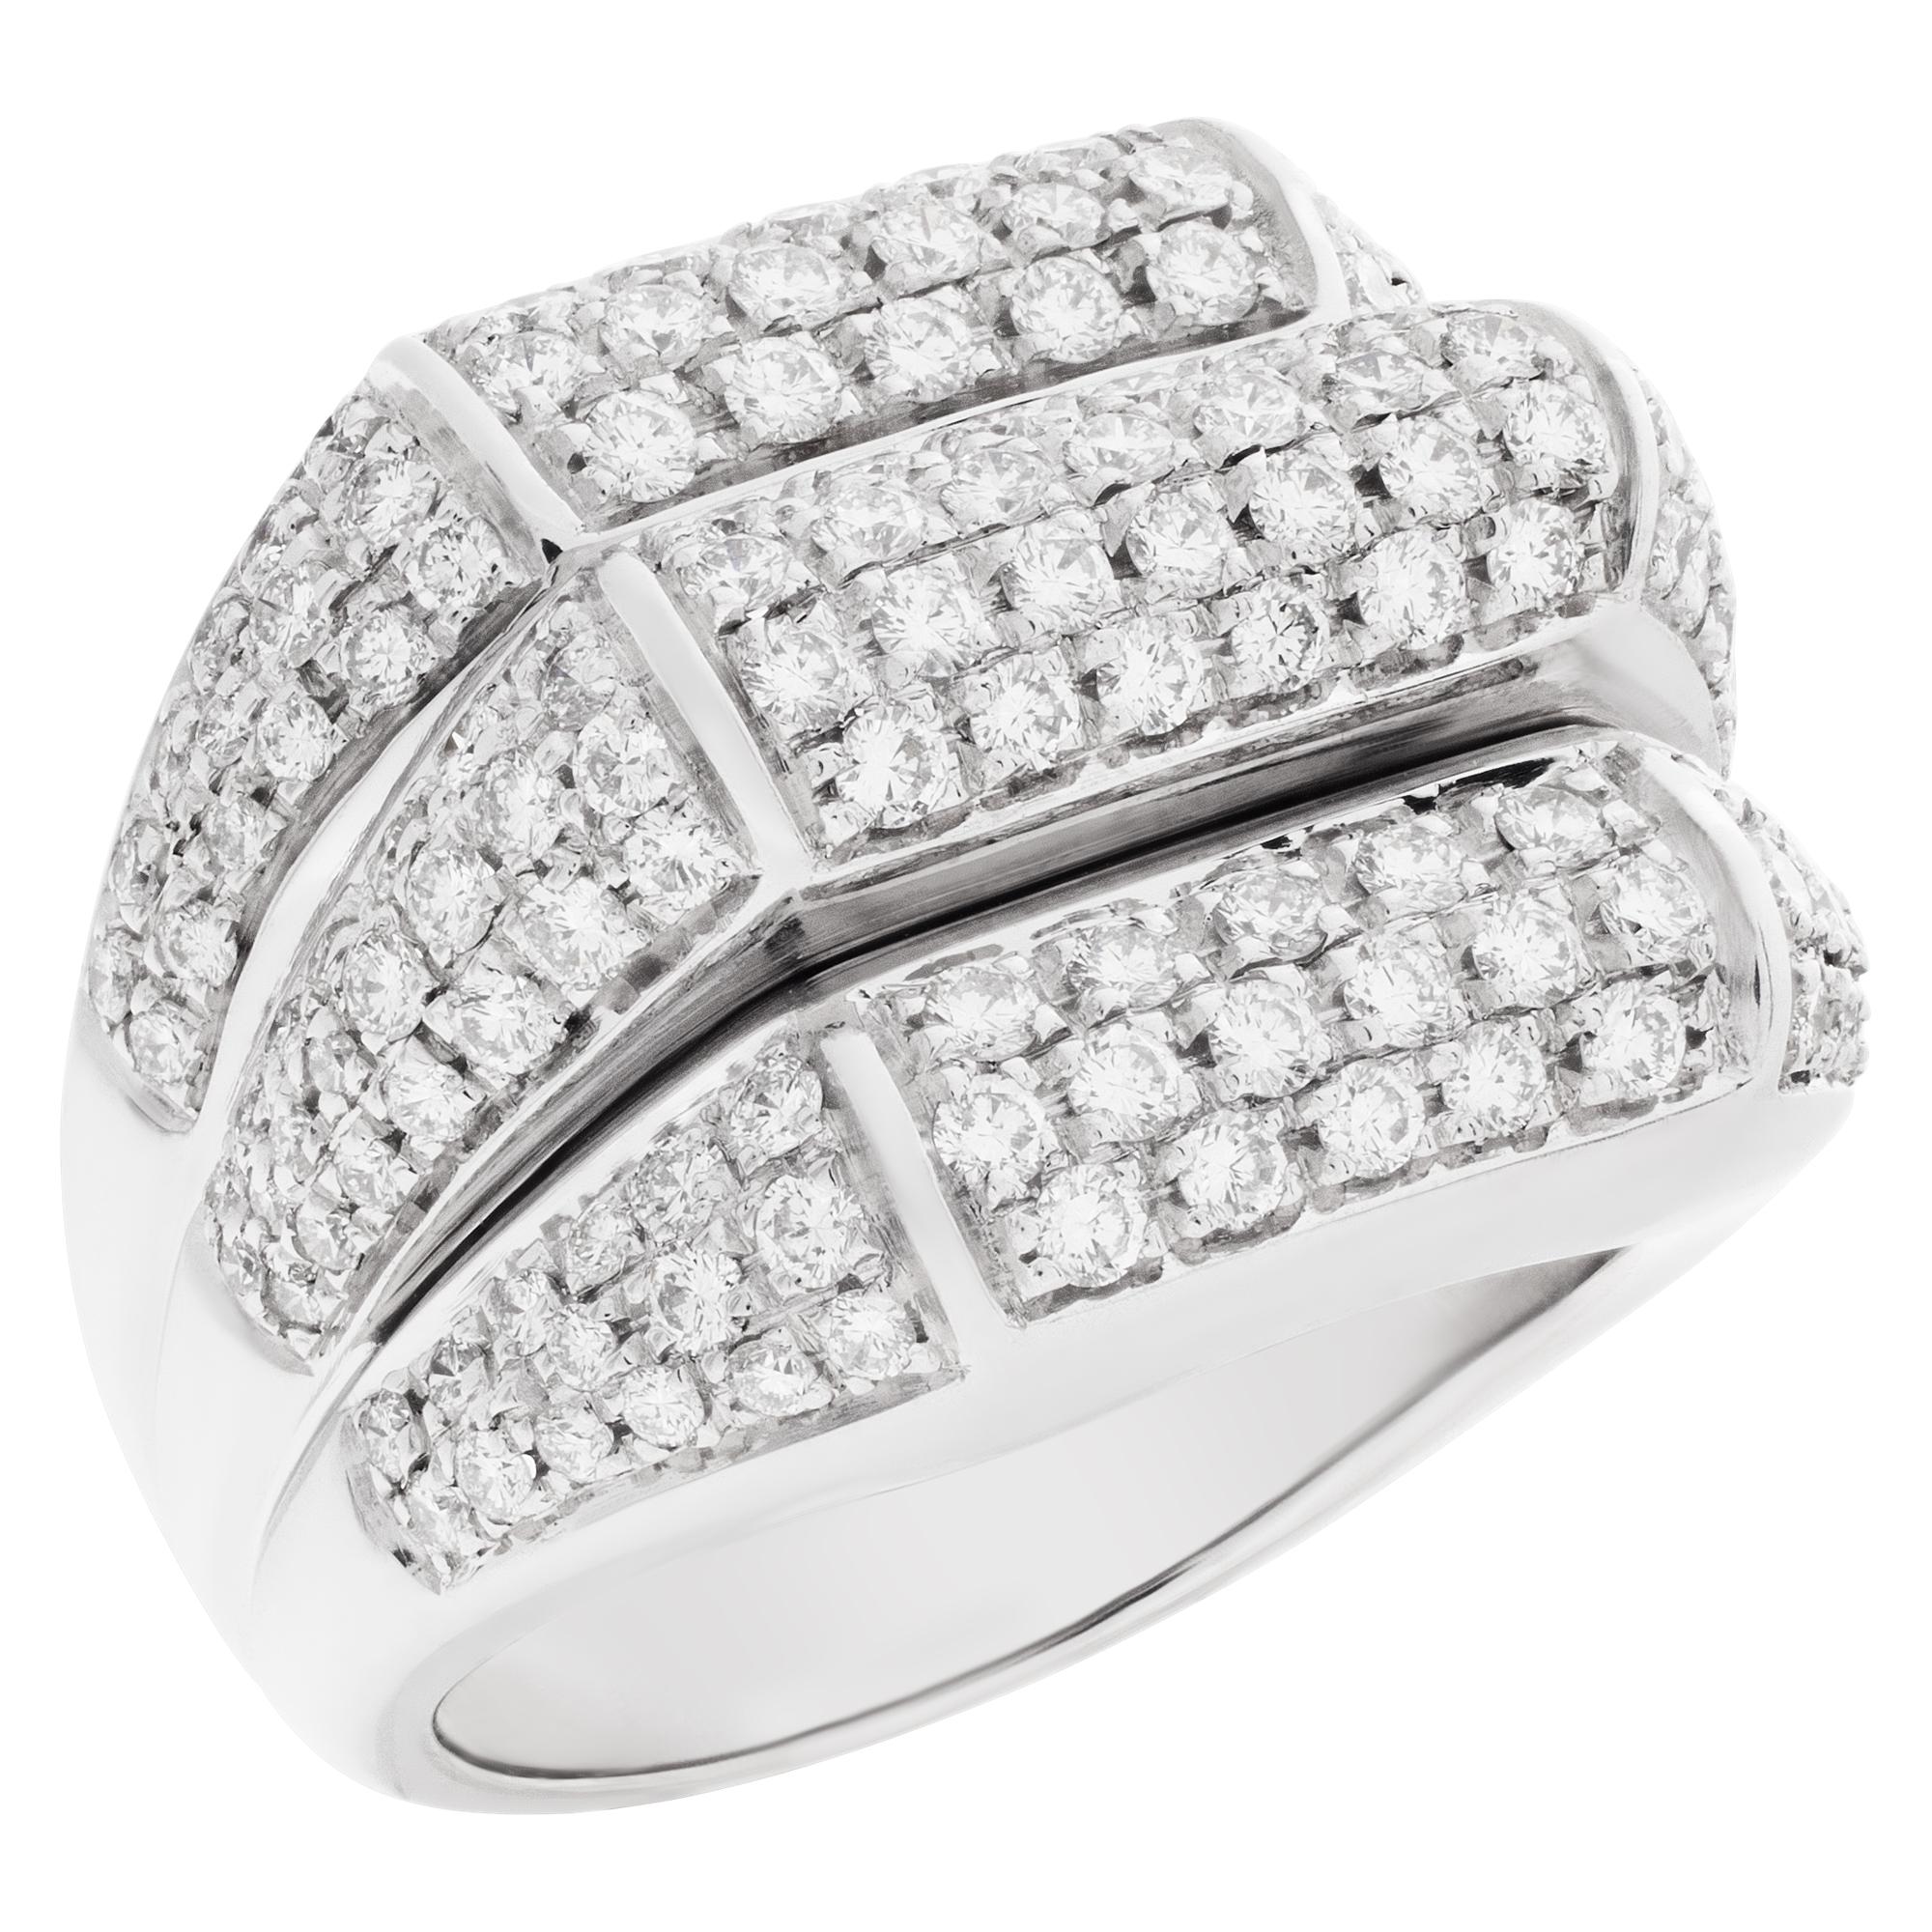 Three-Row Pave Diamond Ring in 18k White Gold In Excellent Condition For Sale In Surfside, FL